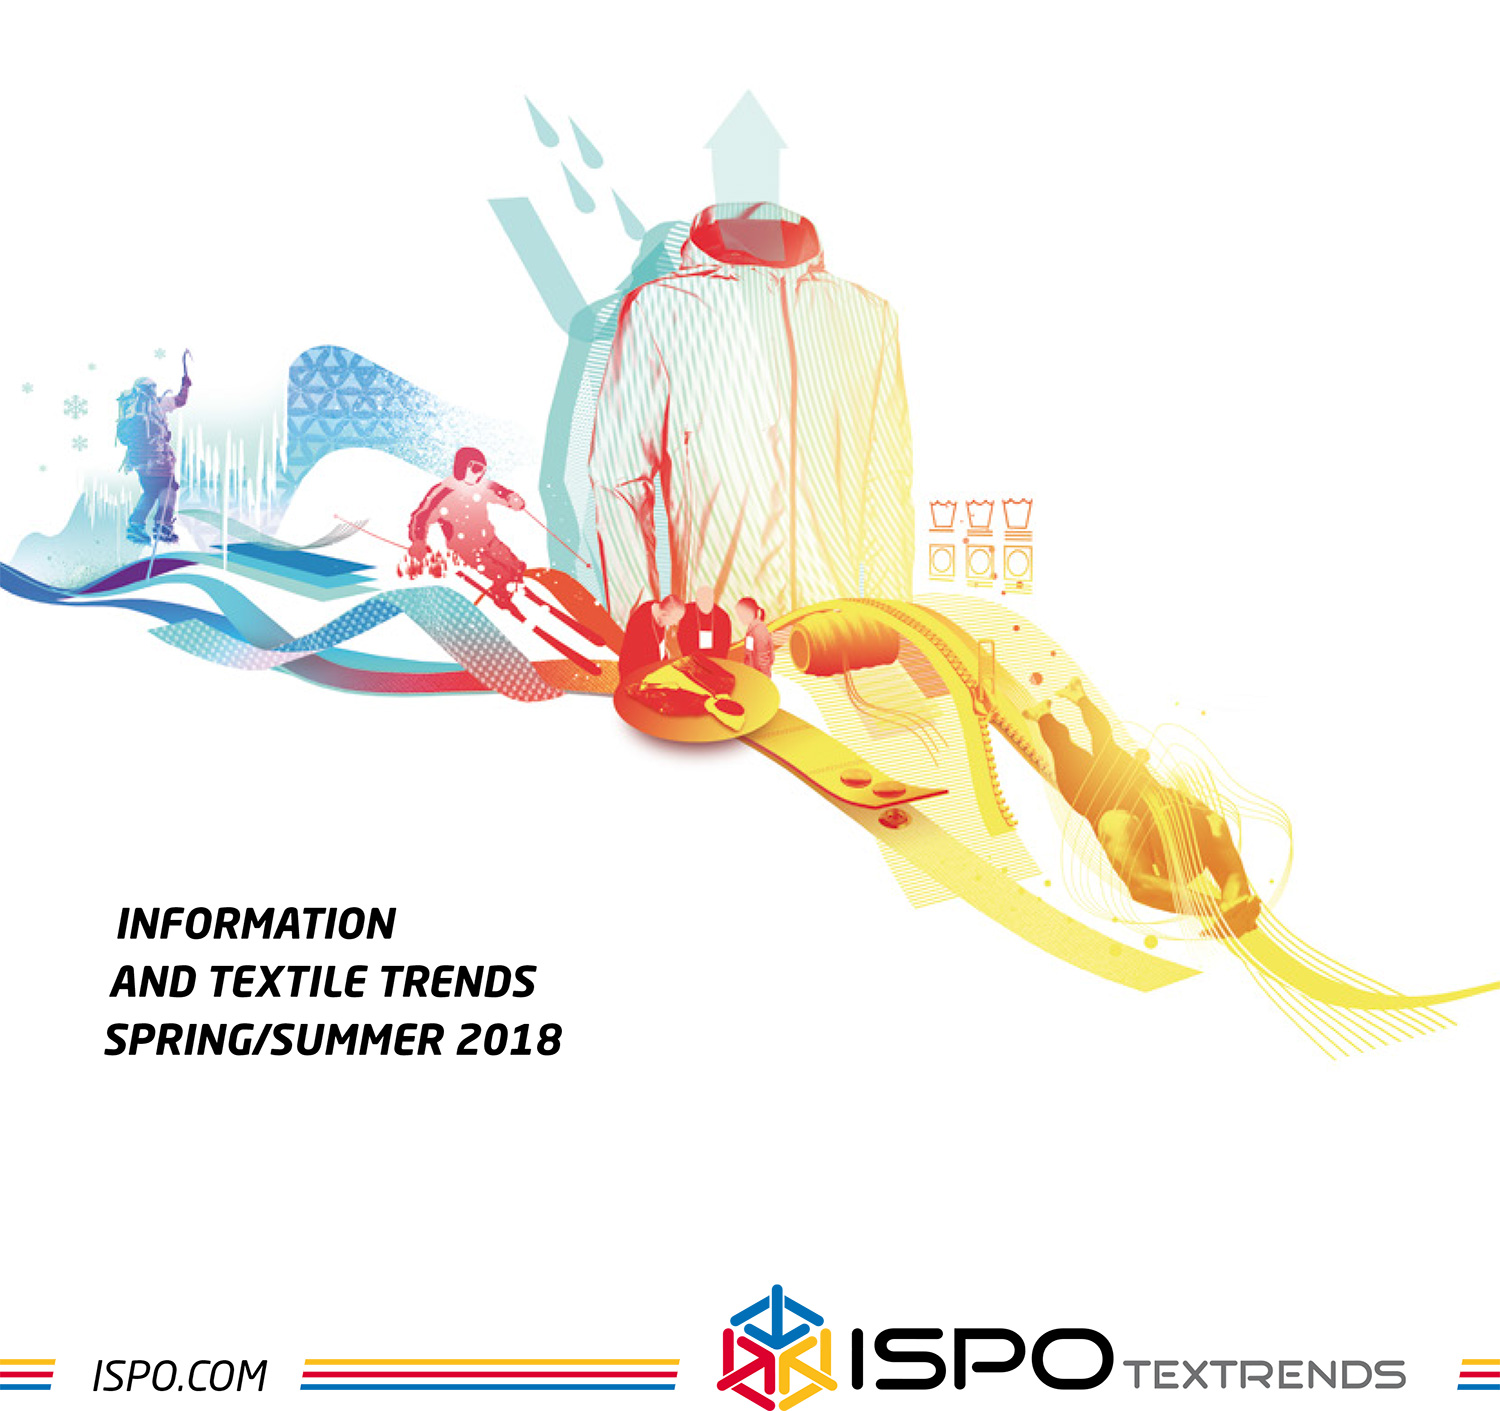 ISPO Textiles Trends Spring/Summer 2018